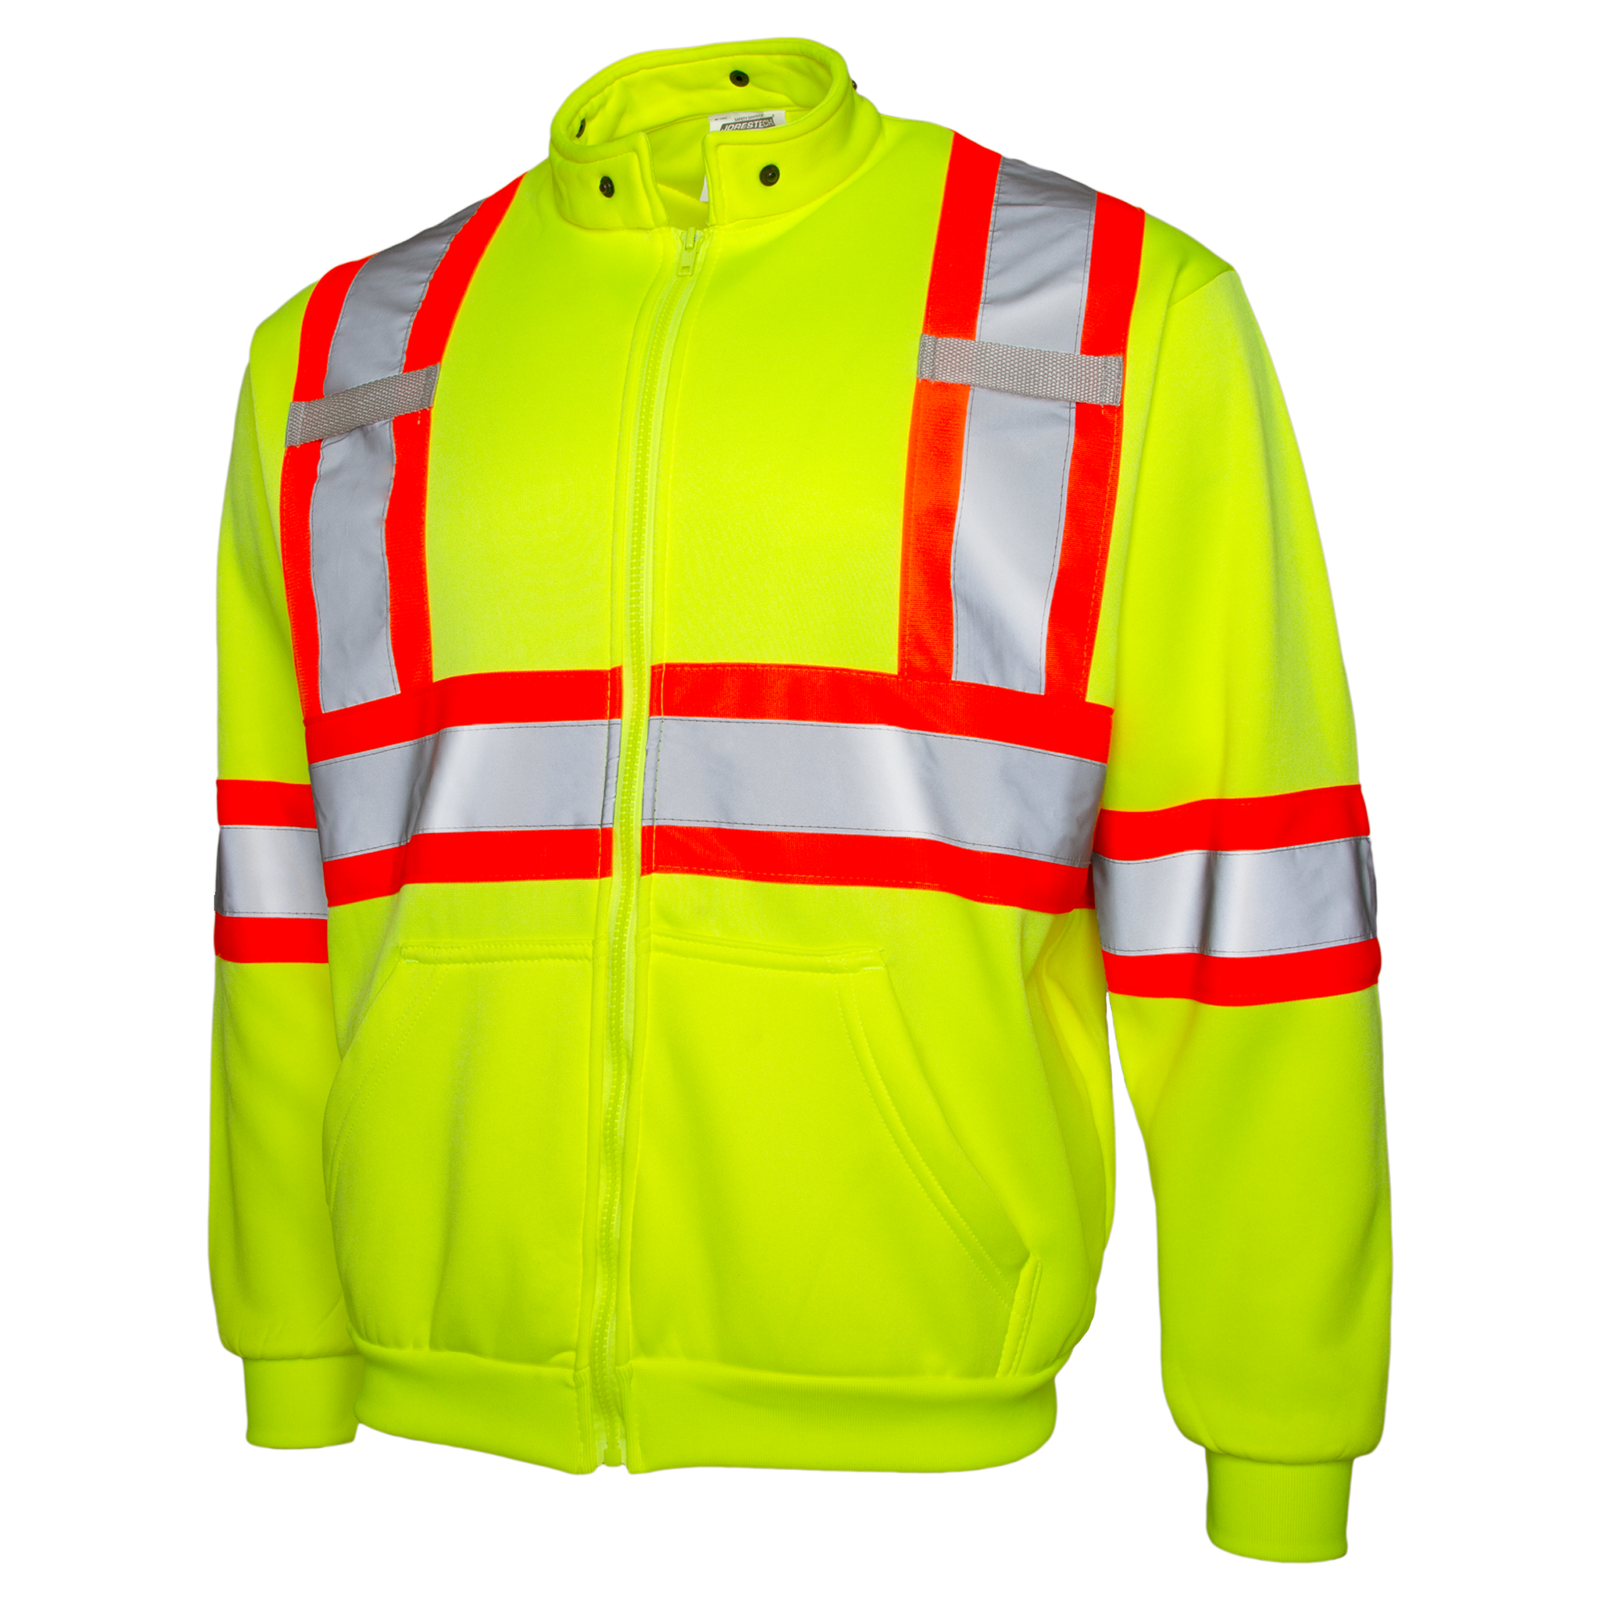 Diagonal view of the lime JORESTECH hi-vis sweater with reflective stripes with full zipper and hood